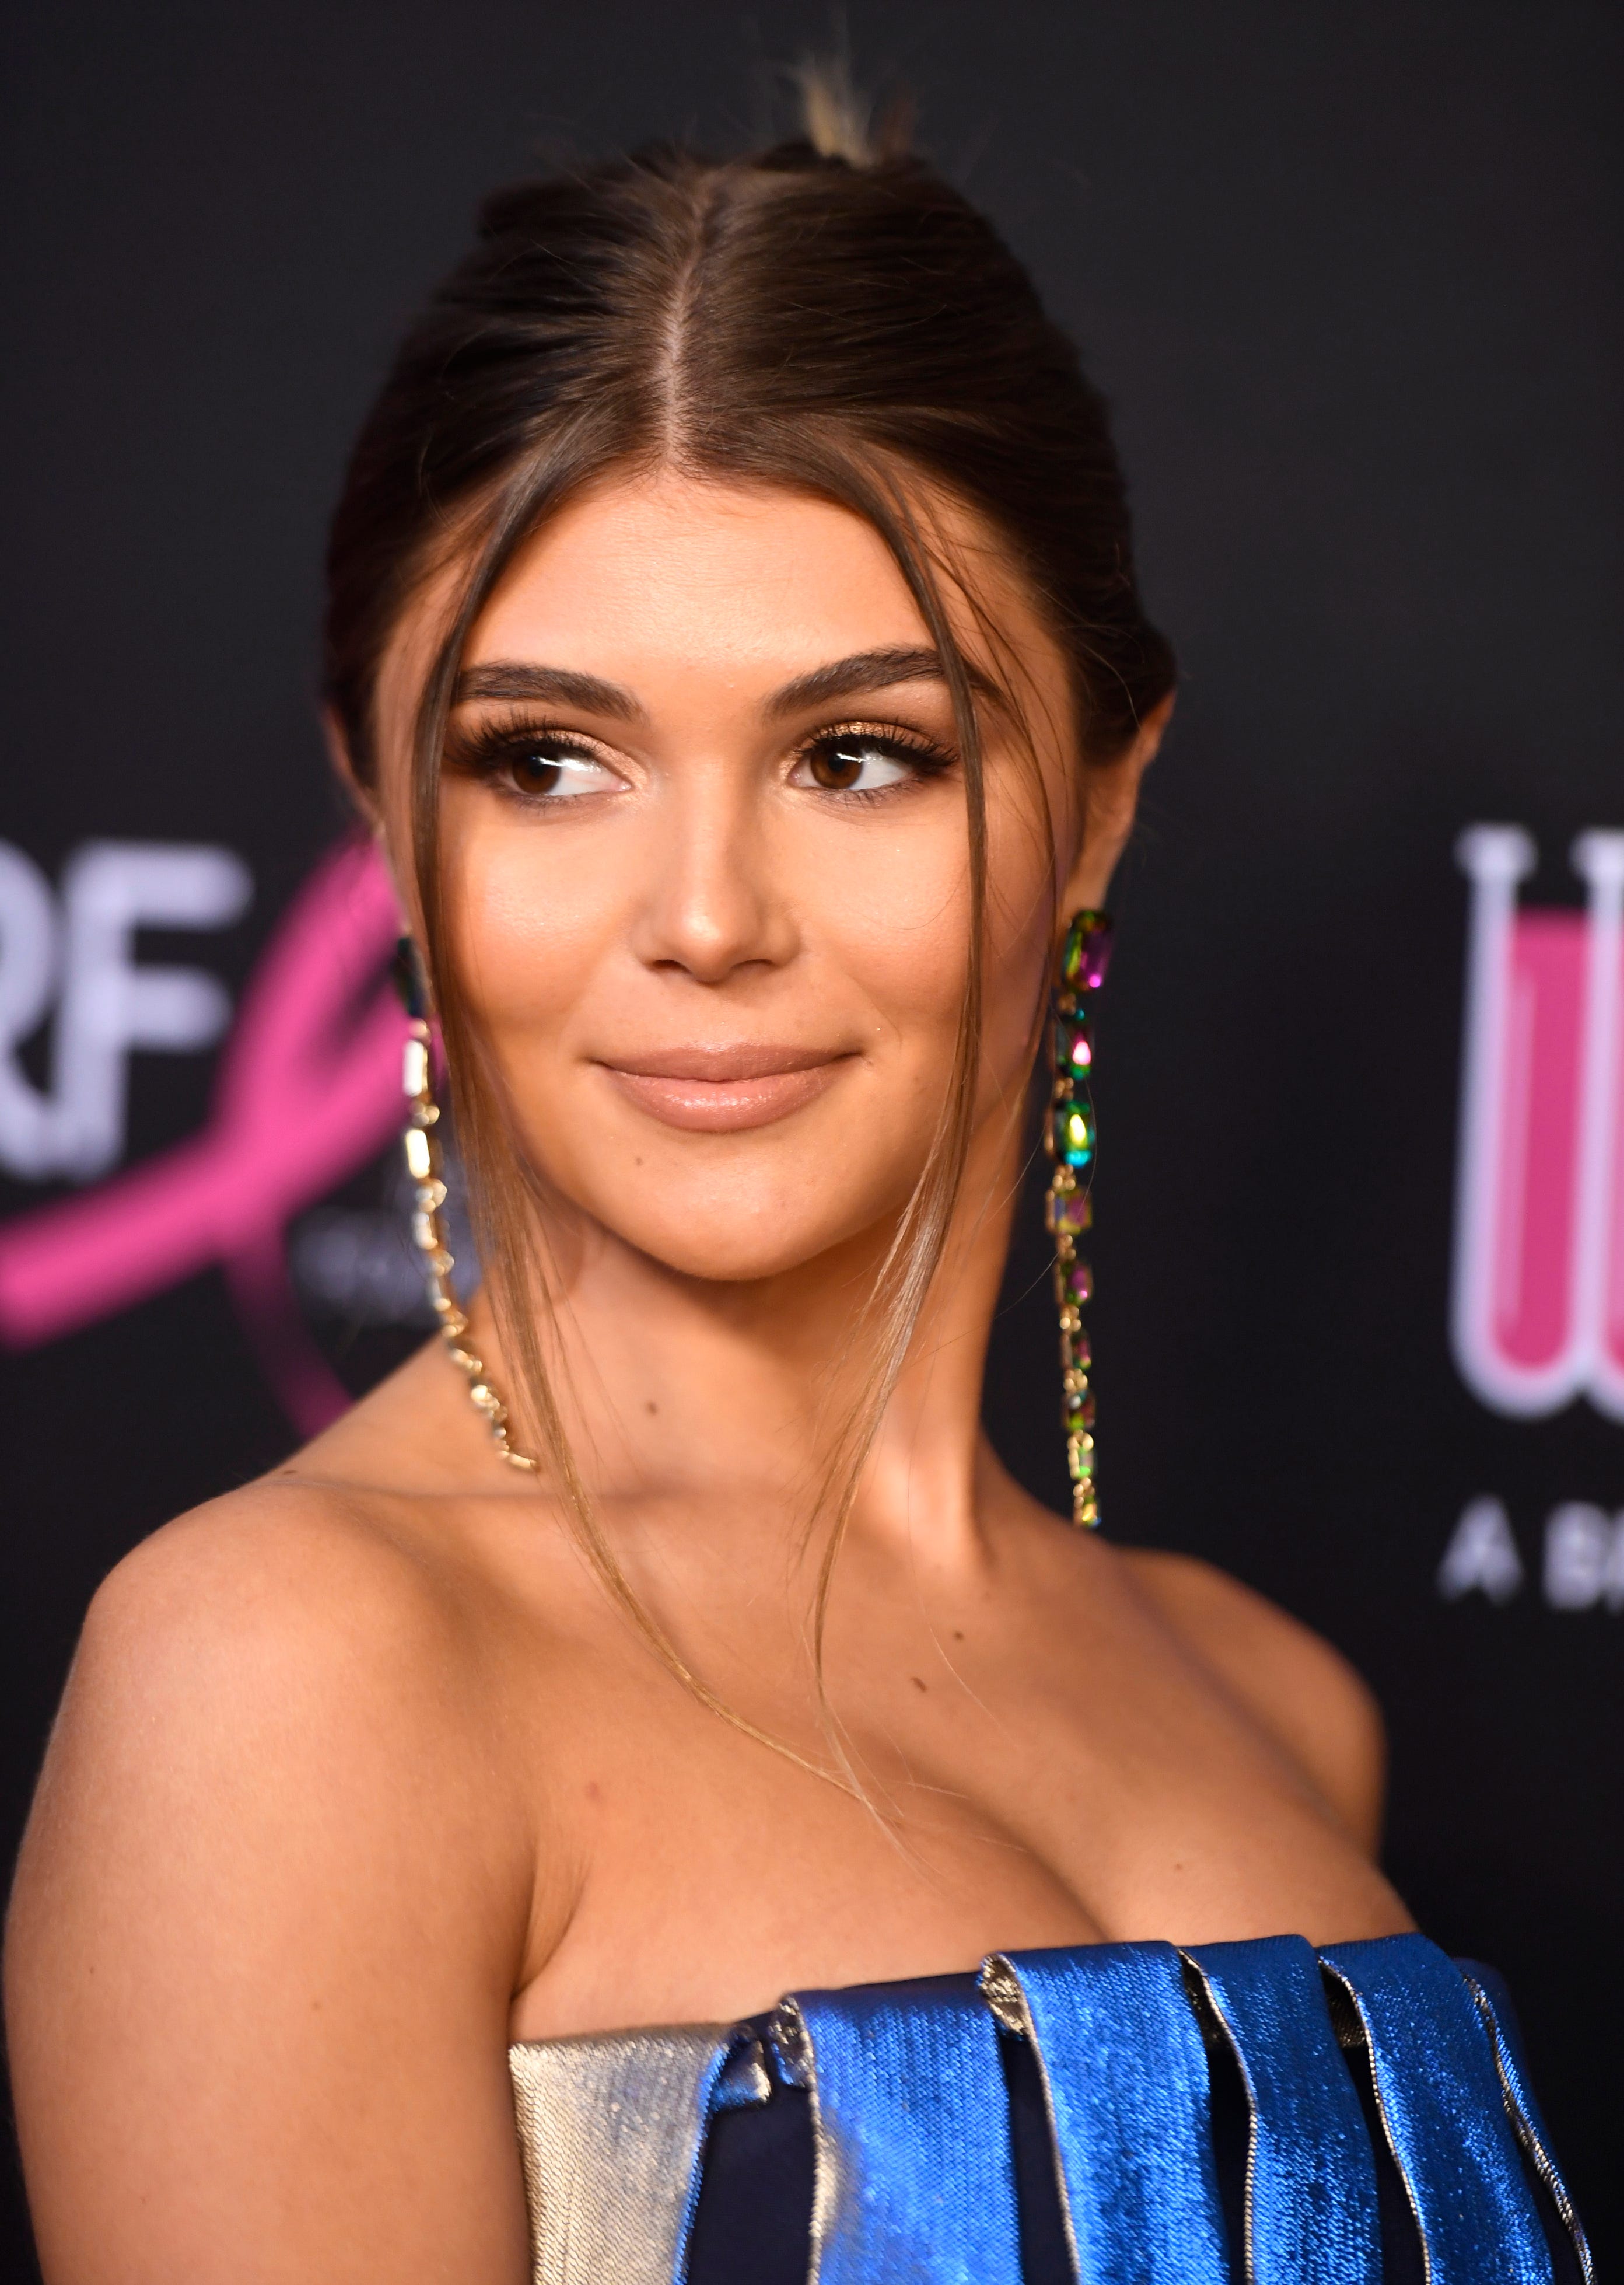 Olivia Jade Giannulli: Her life in pictures